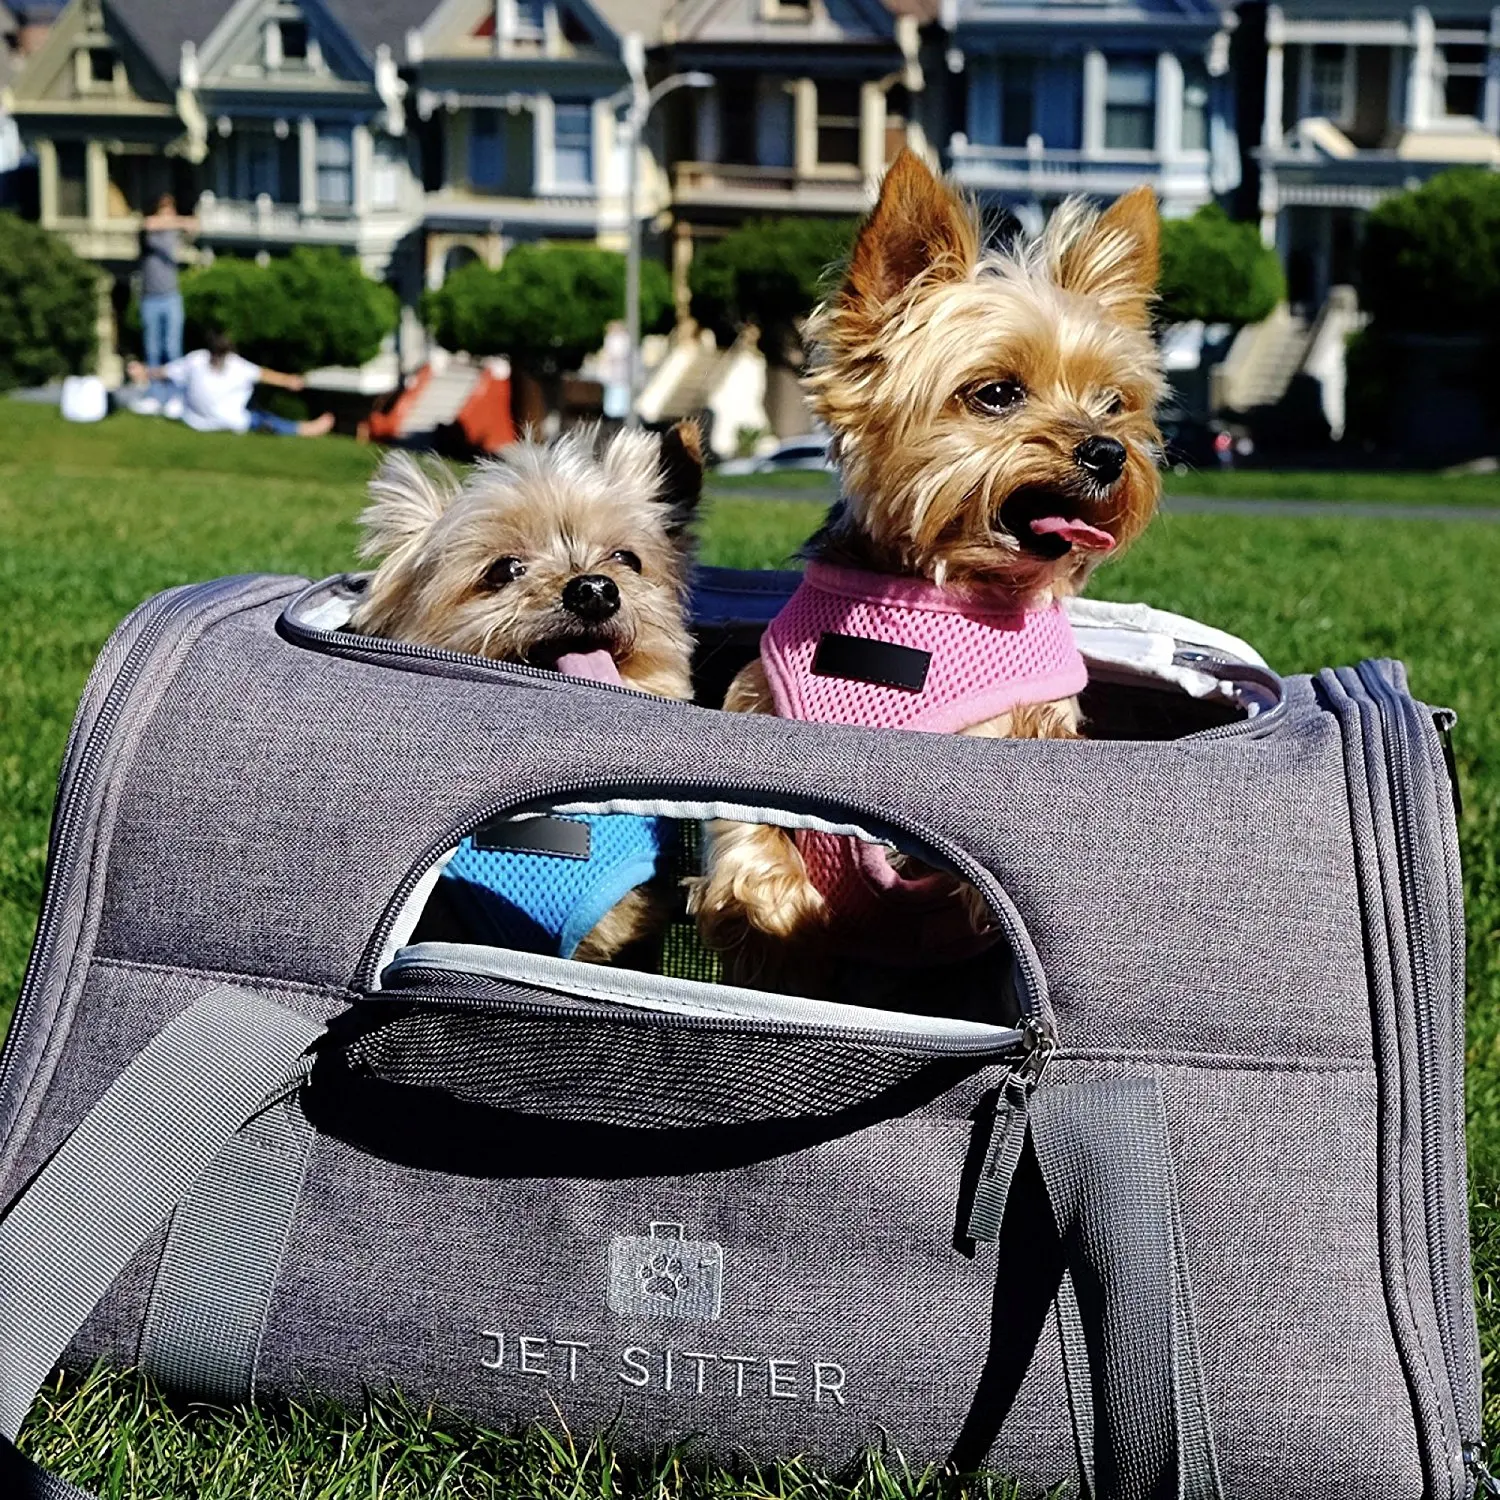 Top Loading Jet Sitter Super Fly Airline Approved Soft Sided Pet Carrier Bag for Small Dogs or Cats TSA Travel 